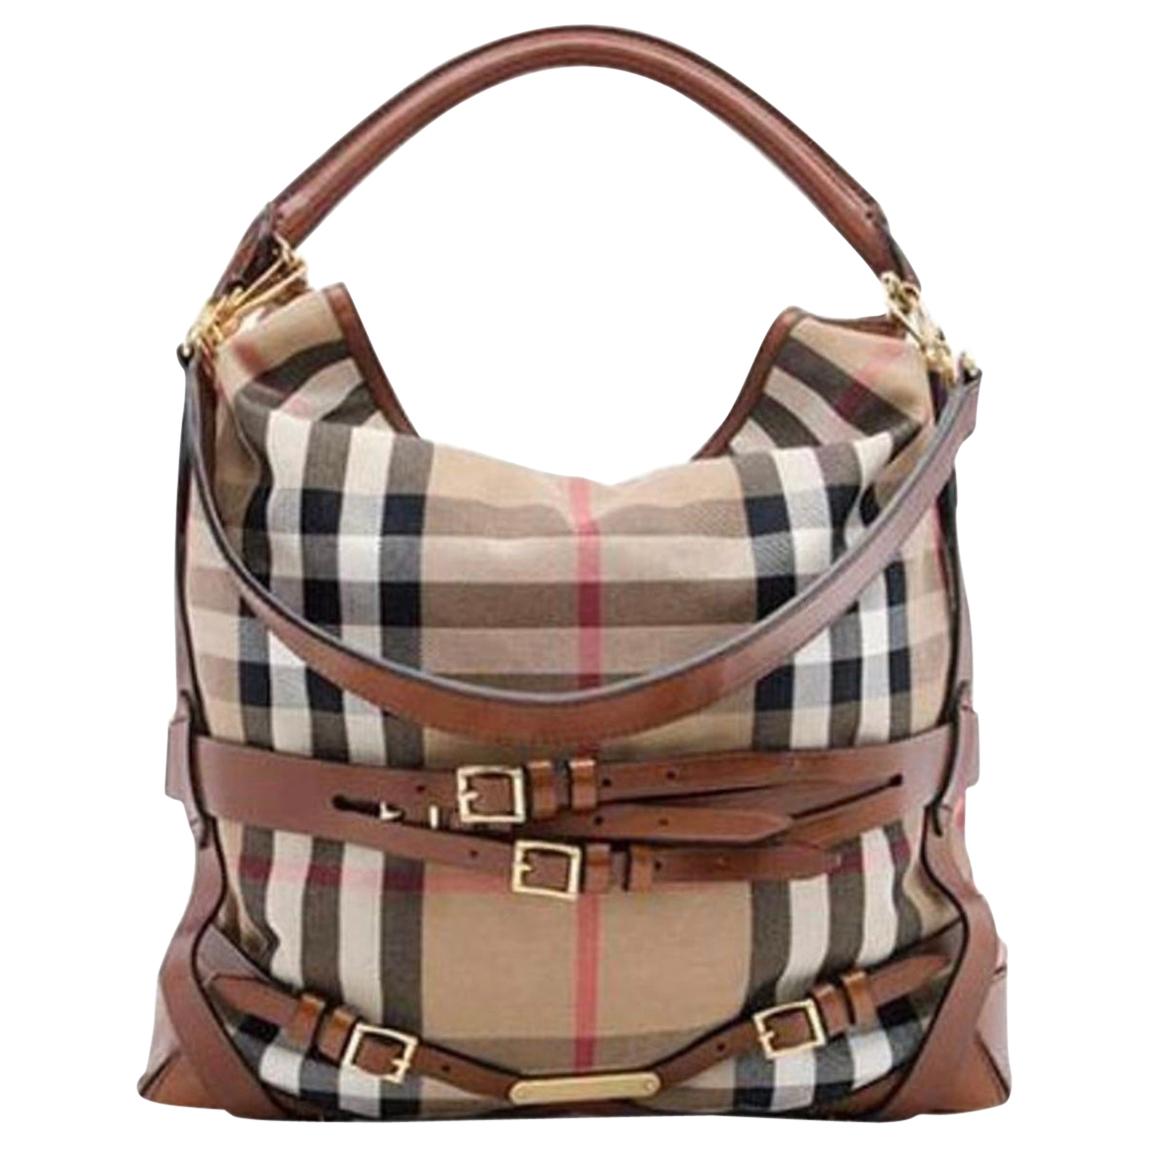  Bridle House Check Gosford Large Brown Leather Canvas Hobo Bag